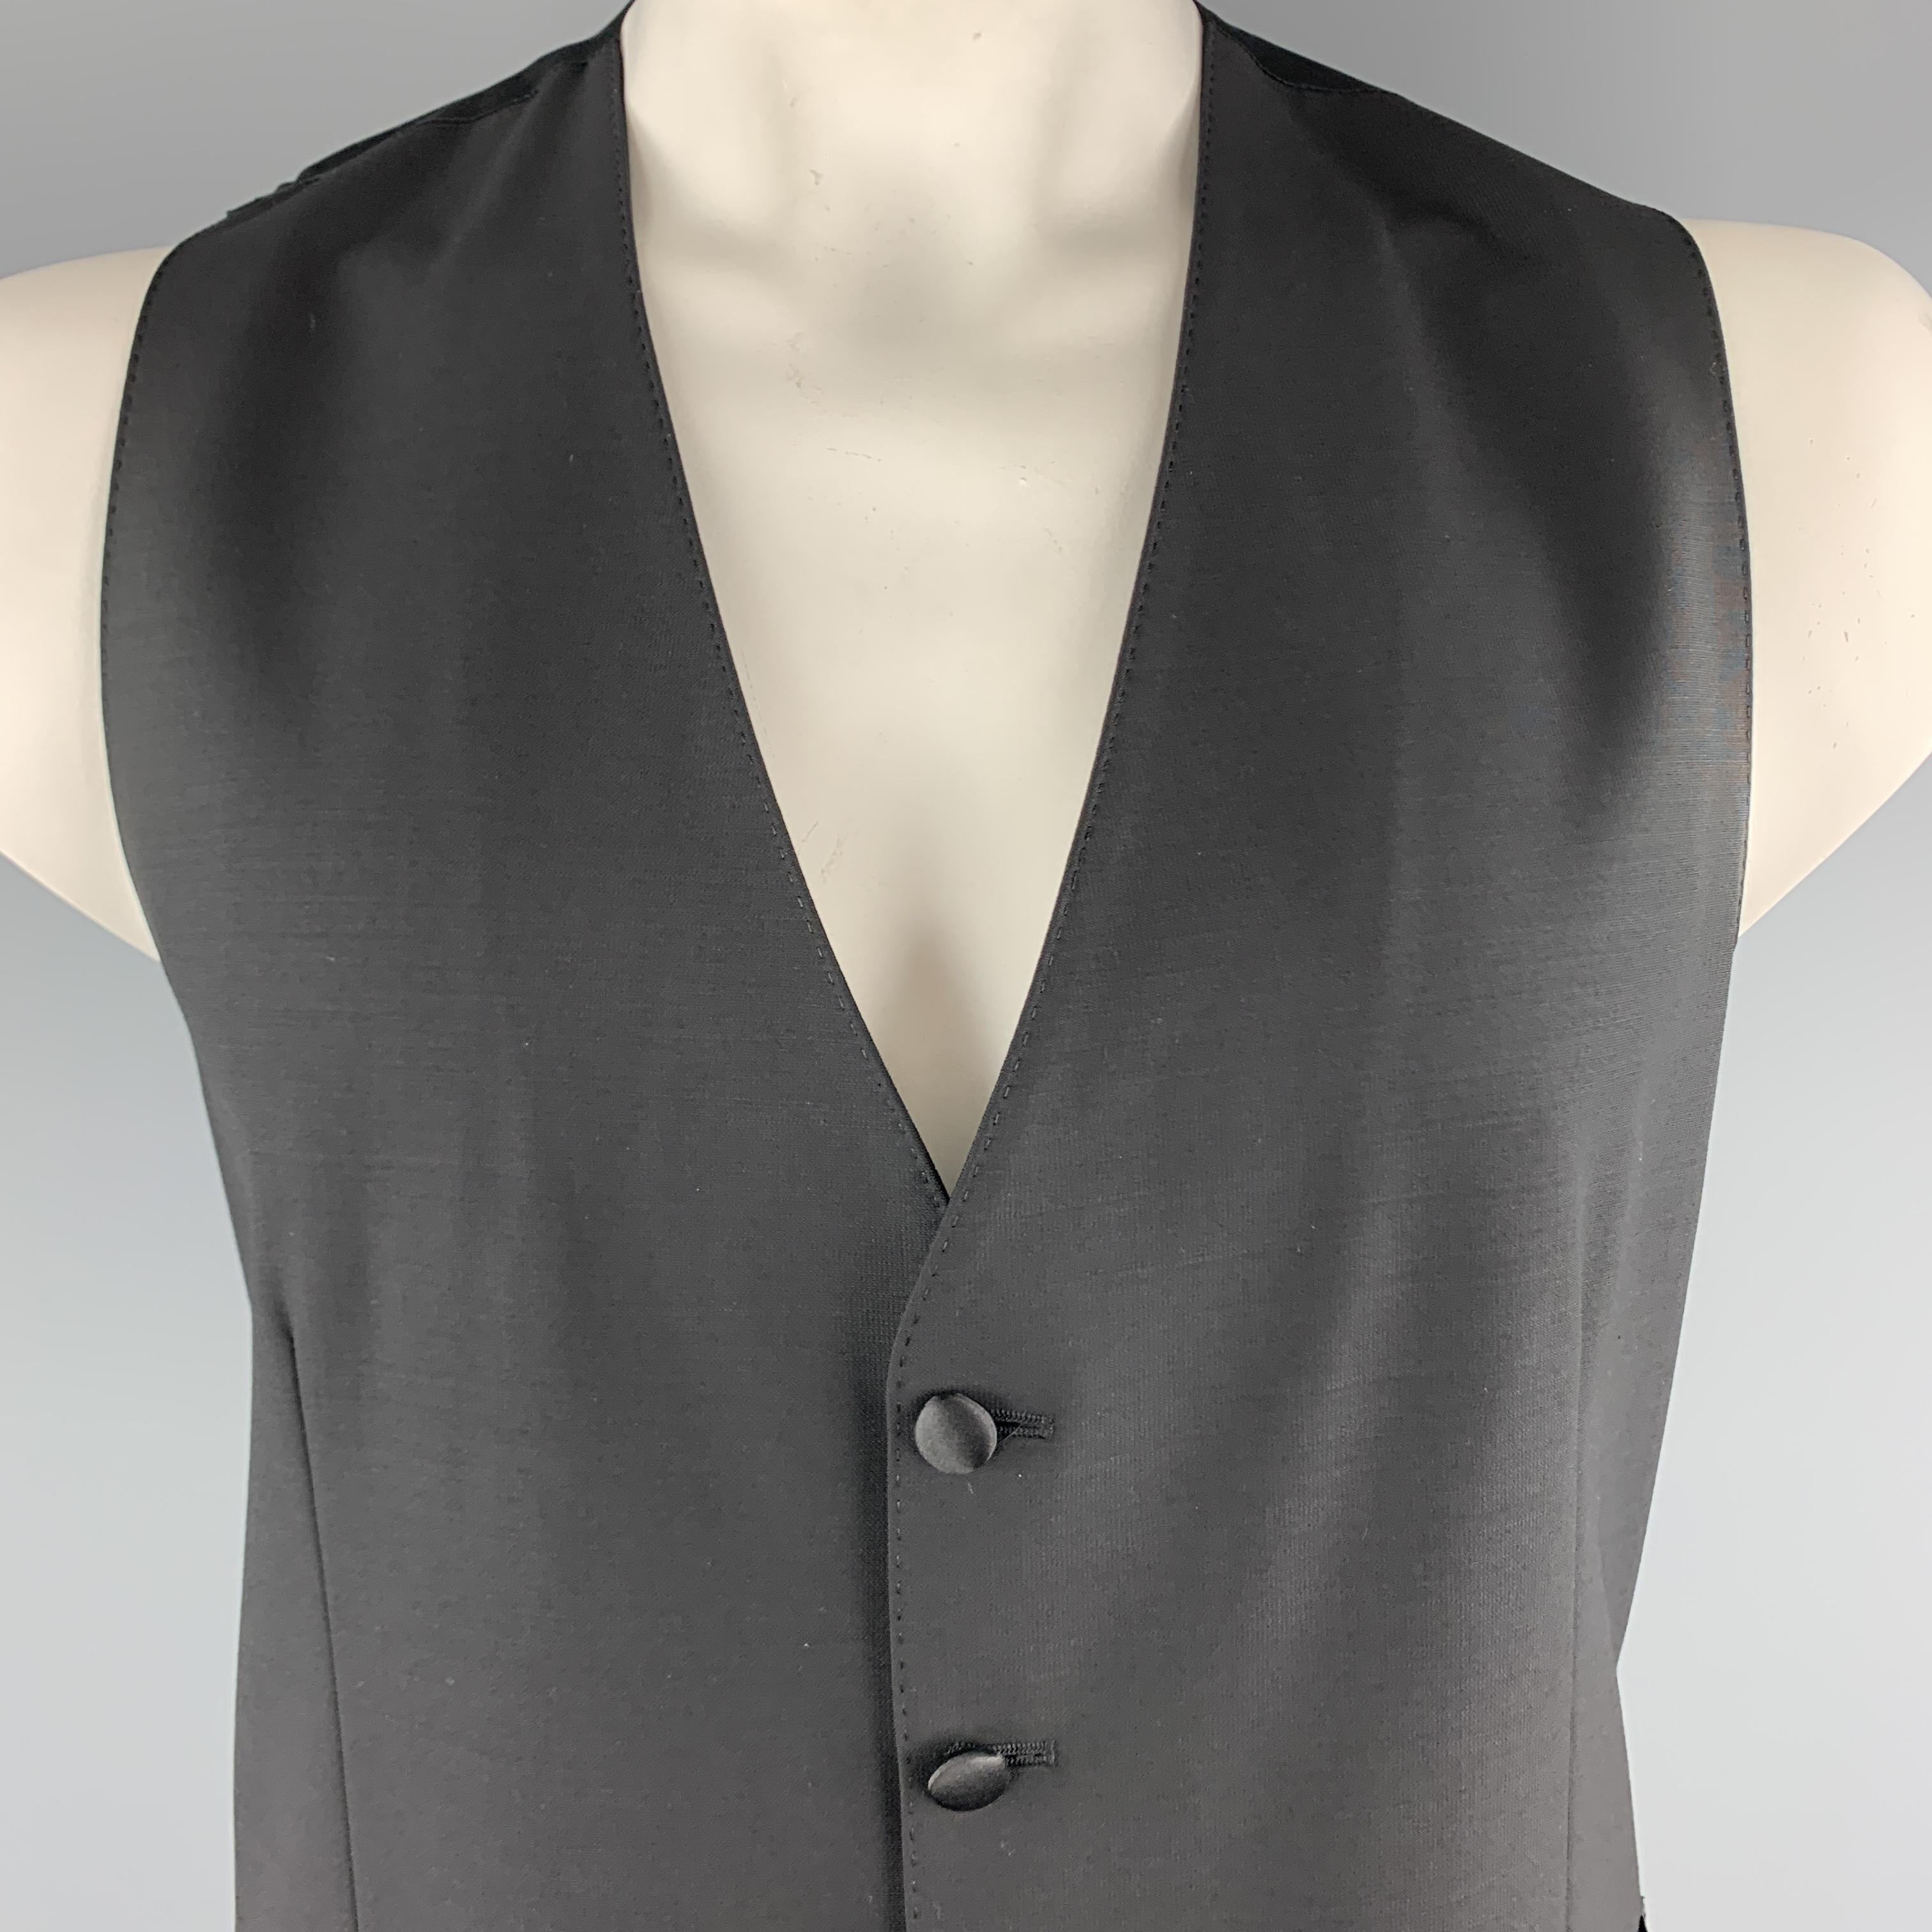 DOLCE & GABBANA dress vest comes in black wool blend with a polka dot satin back. Made in Italy.

Excellent Pre-Owned Condition.
Marked: IT 54

Measurements:

Shoulder: 13.5 in.
Chest: 40 in.
Length: 28 in.